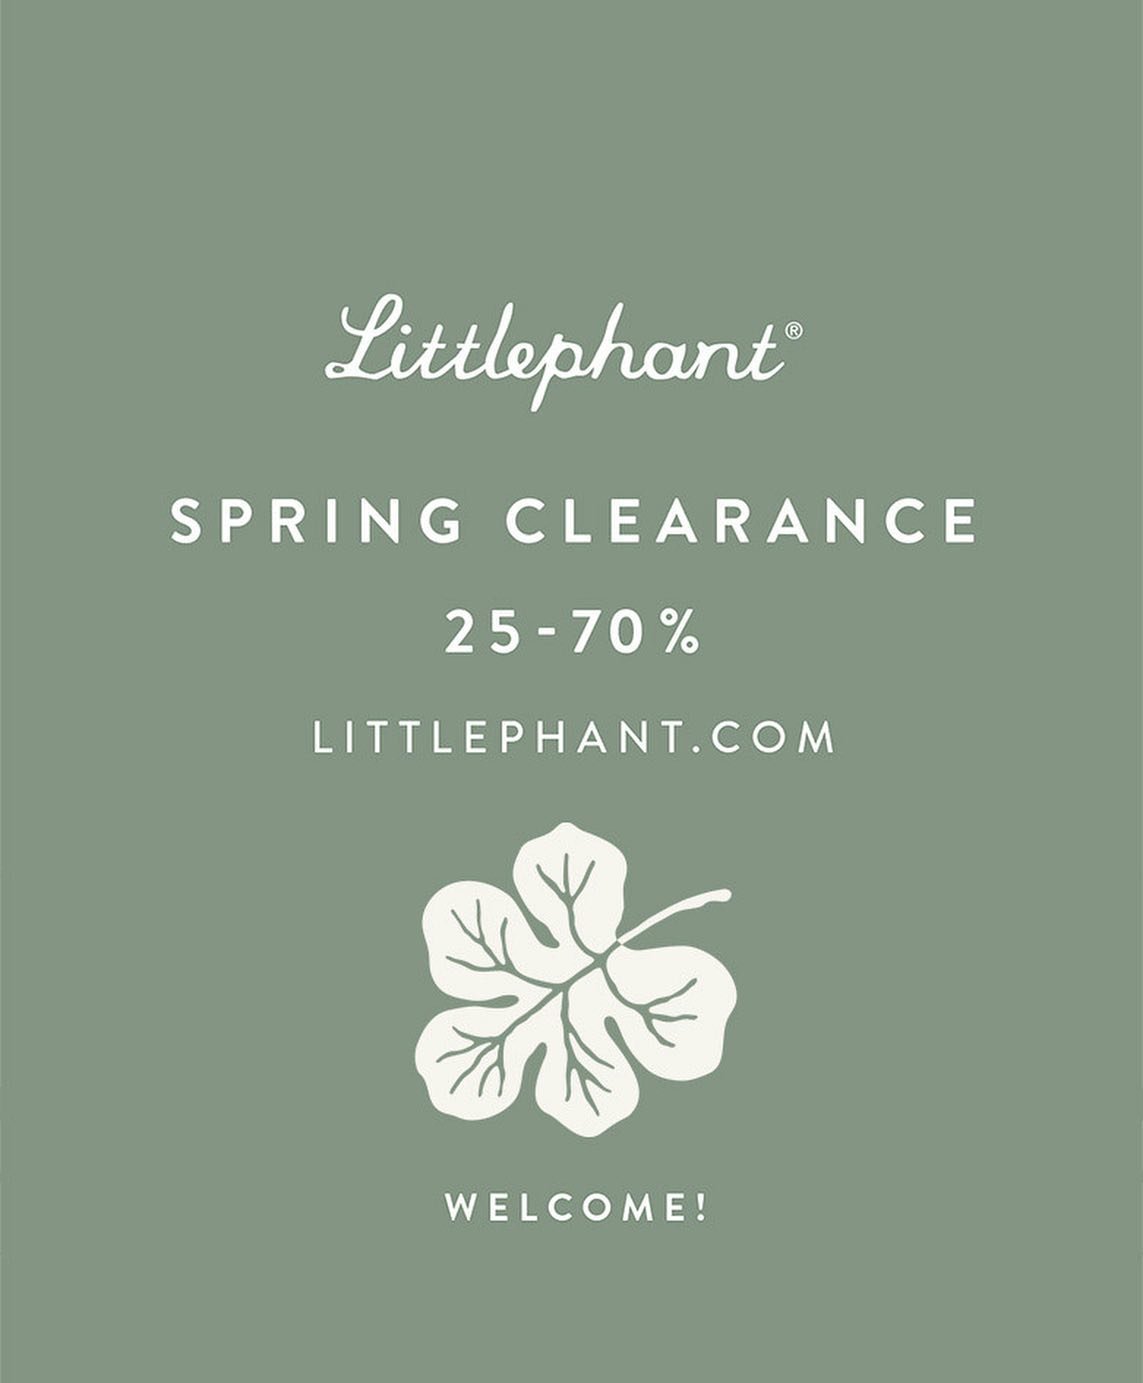 Welcome to our online spring clearance where you get 25-70% off on selected items 🌿 We are tidying up in our little warehouse and there are some great pieces available as long as stock last, or until April 30th the latest❤️ #Littlephant.com
&bull;
☀